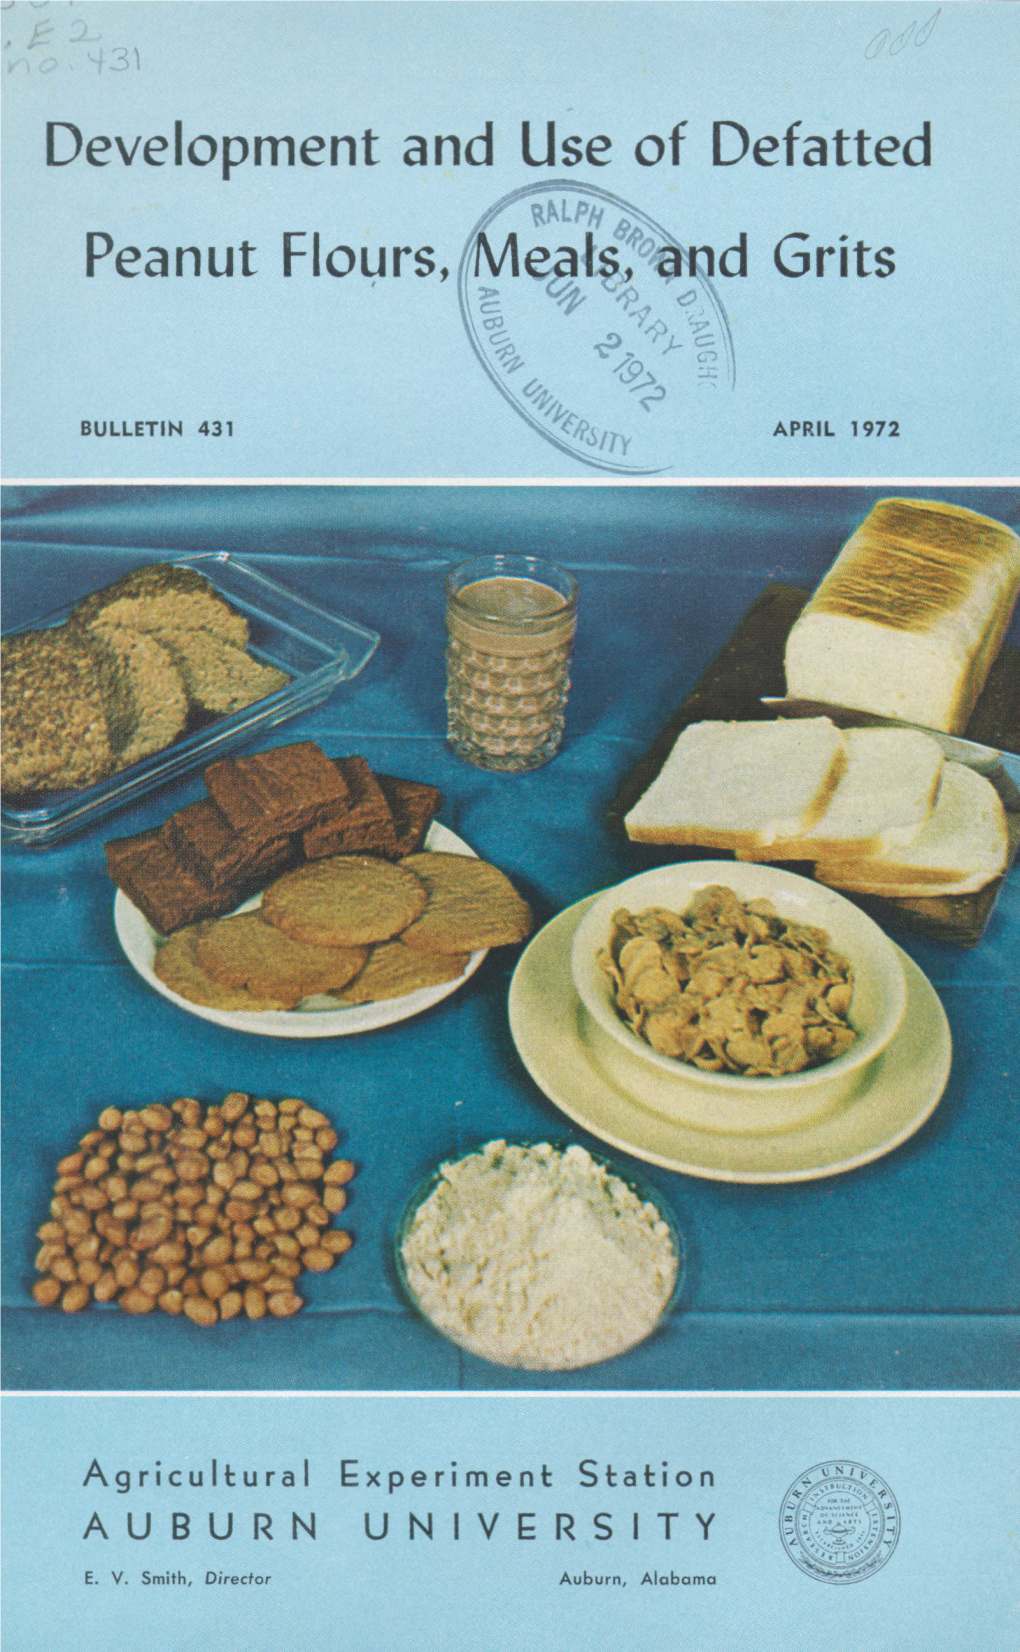 Development and Use of Defatted Peanut Flours, Meals, and Grits